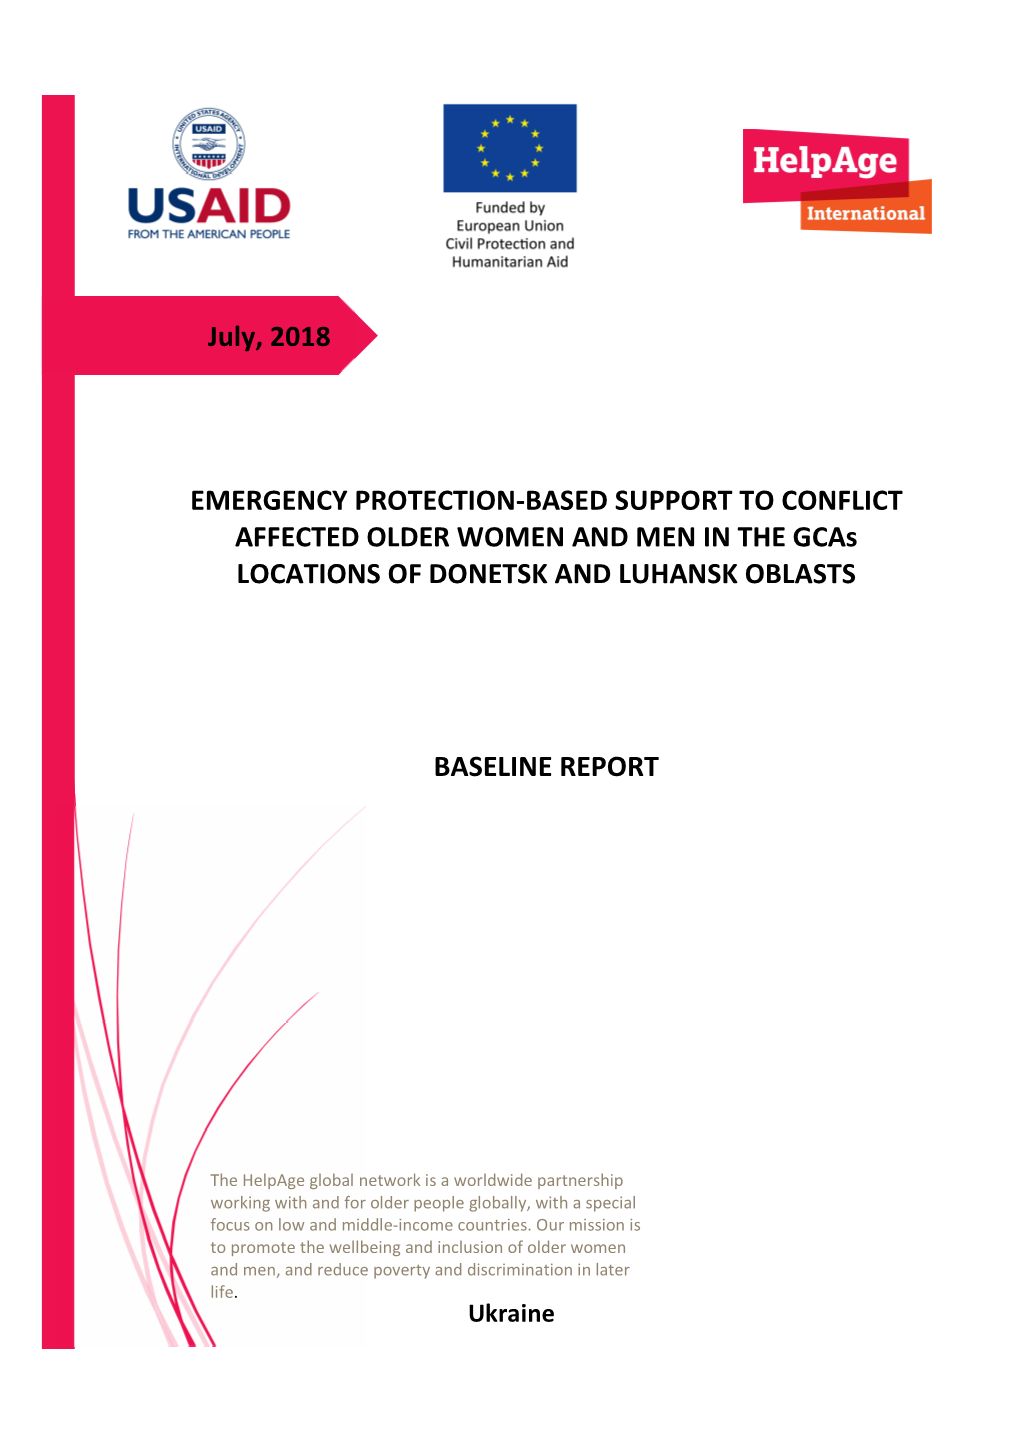 July, 2018 EMERGENCY PROTECTION-BASED SUPPORT to CONFLICT AFFECTED OLDER WOMEN and MEN in the Gcas LOCATIONS of DONETSK and LUHA